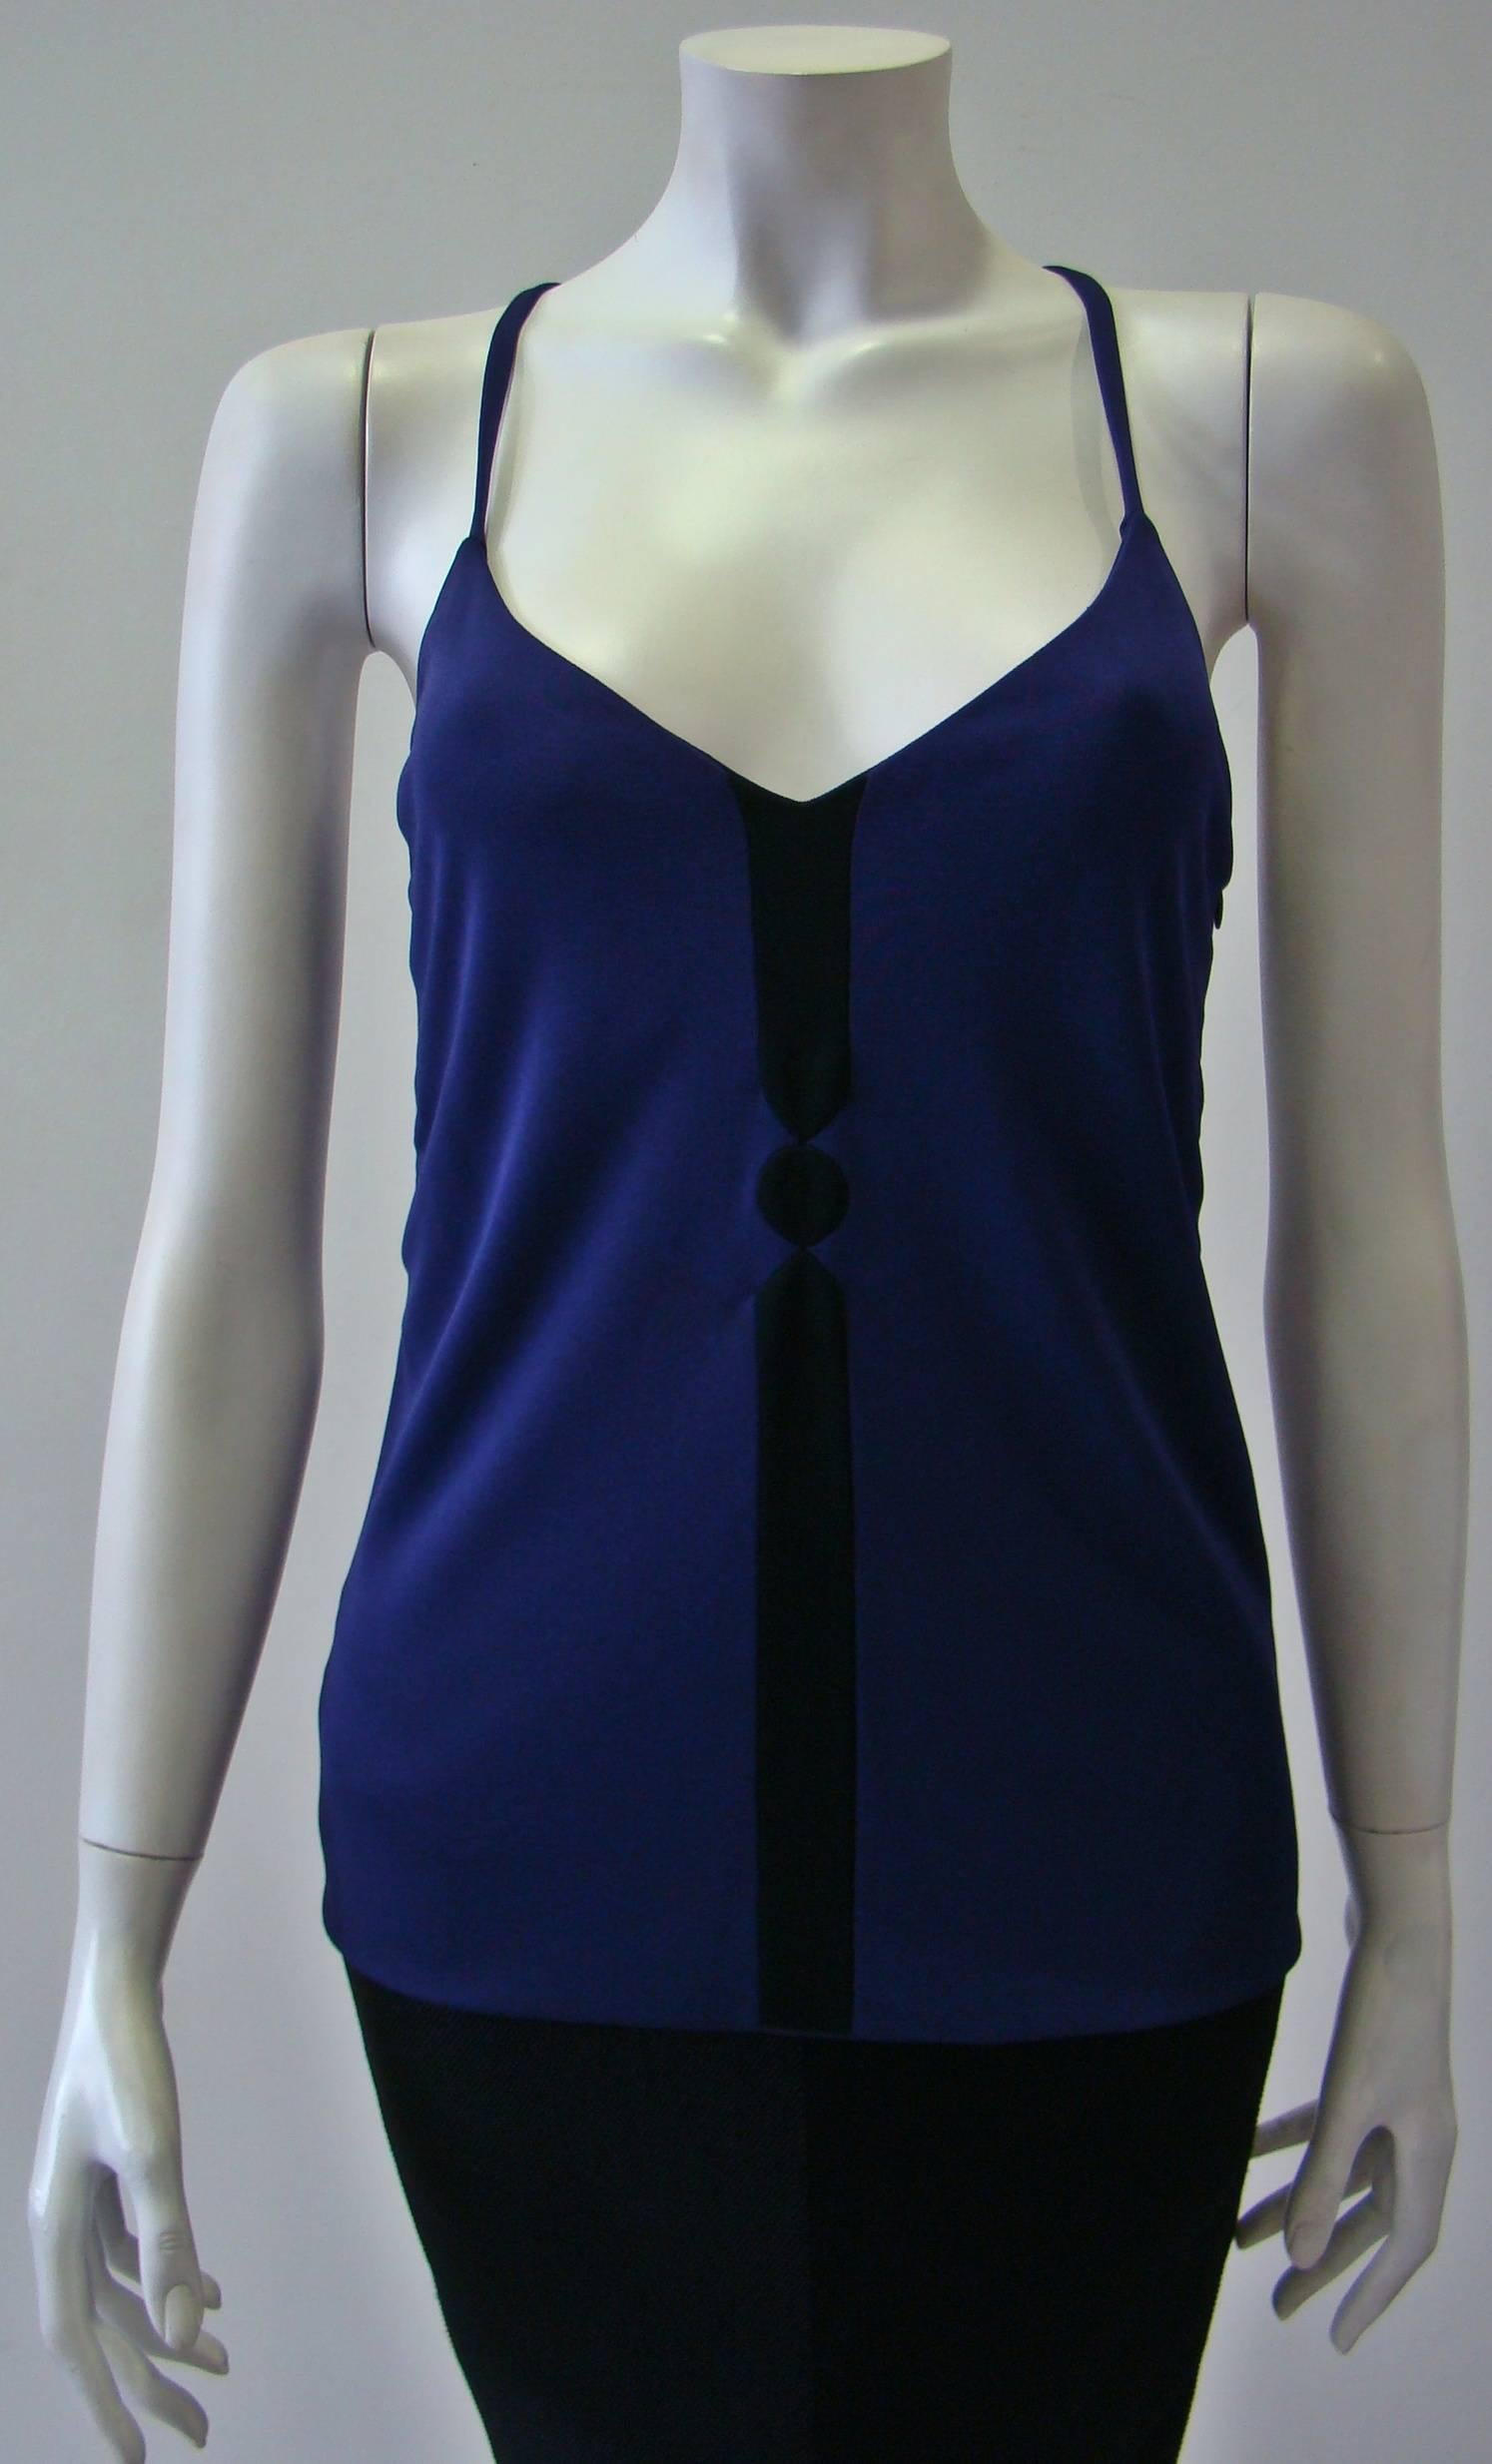 Gianni Versace Couture Camisole Top Purple Jersey With Black Detail Fall 1997